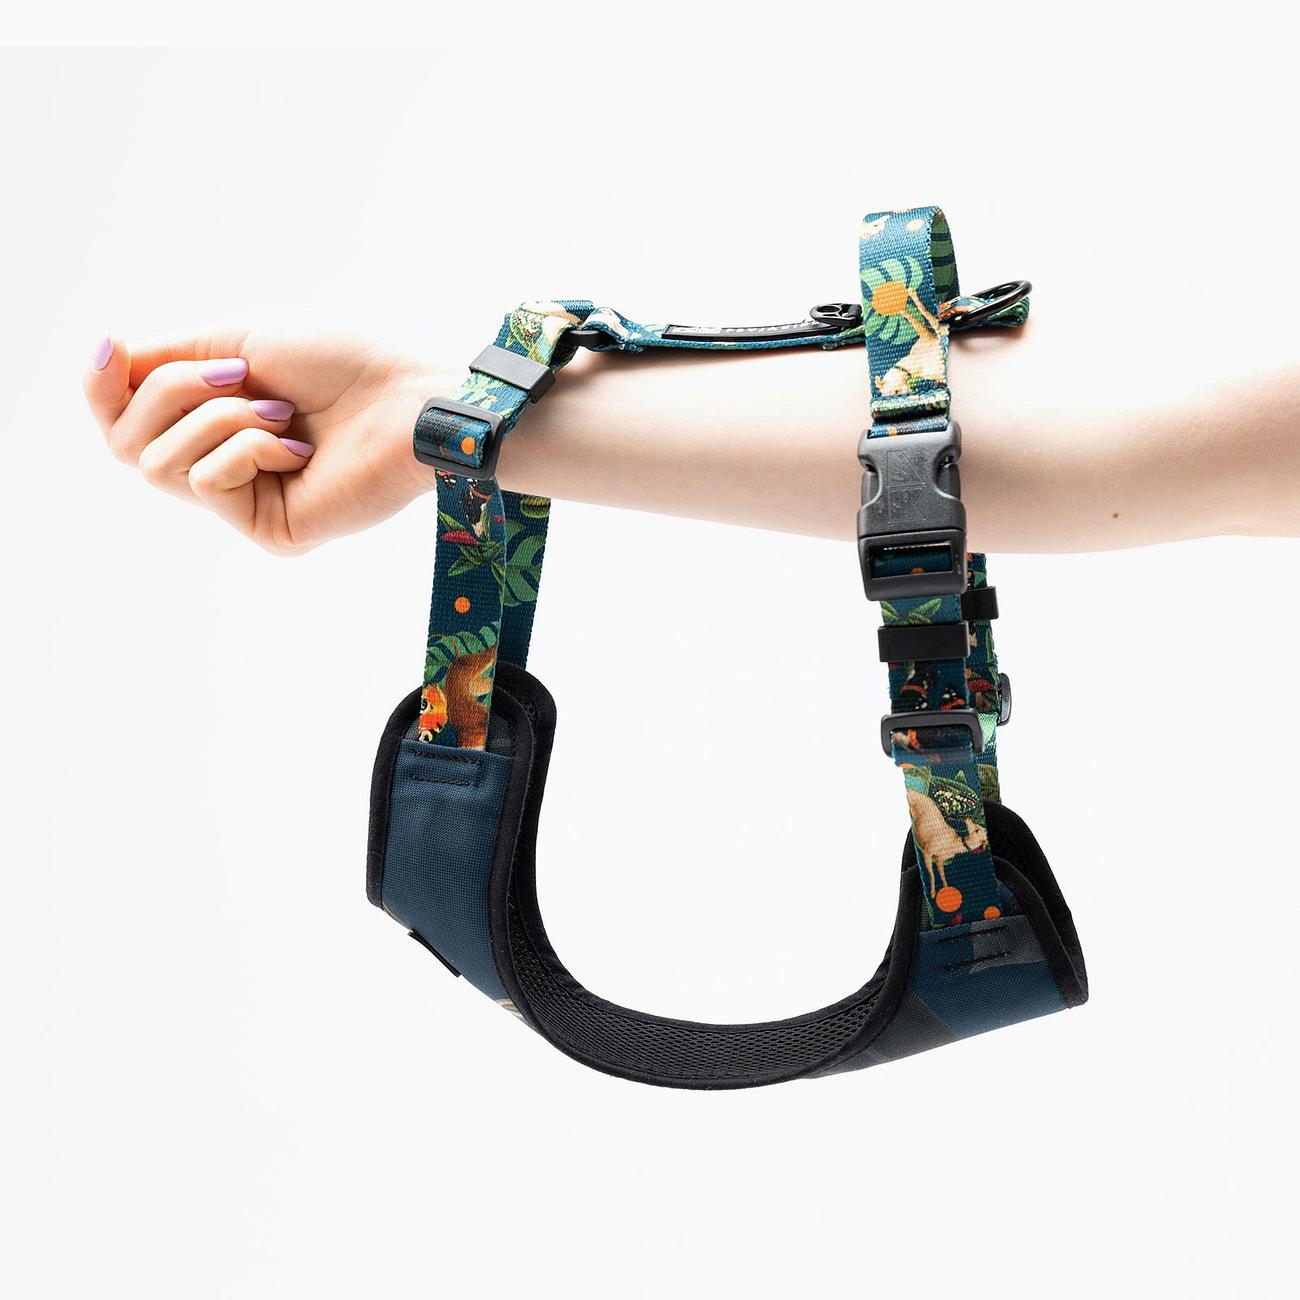 Stay-on pressure-free harness "Doggolage"